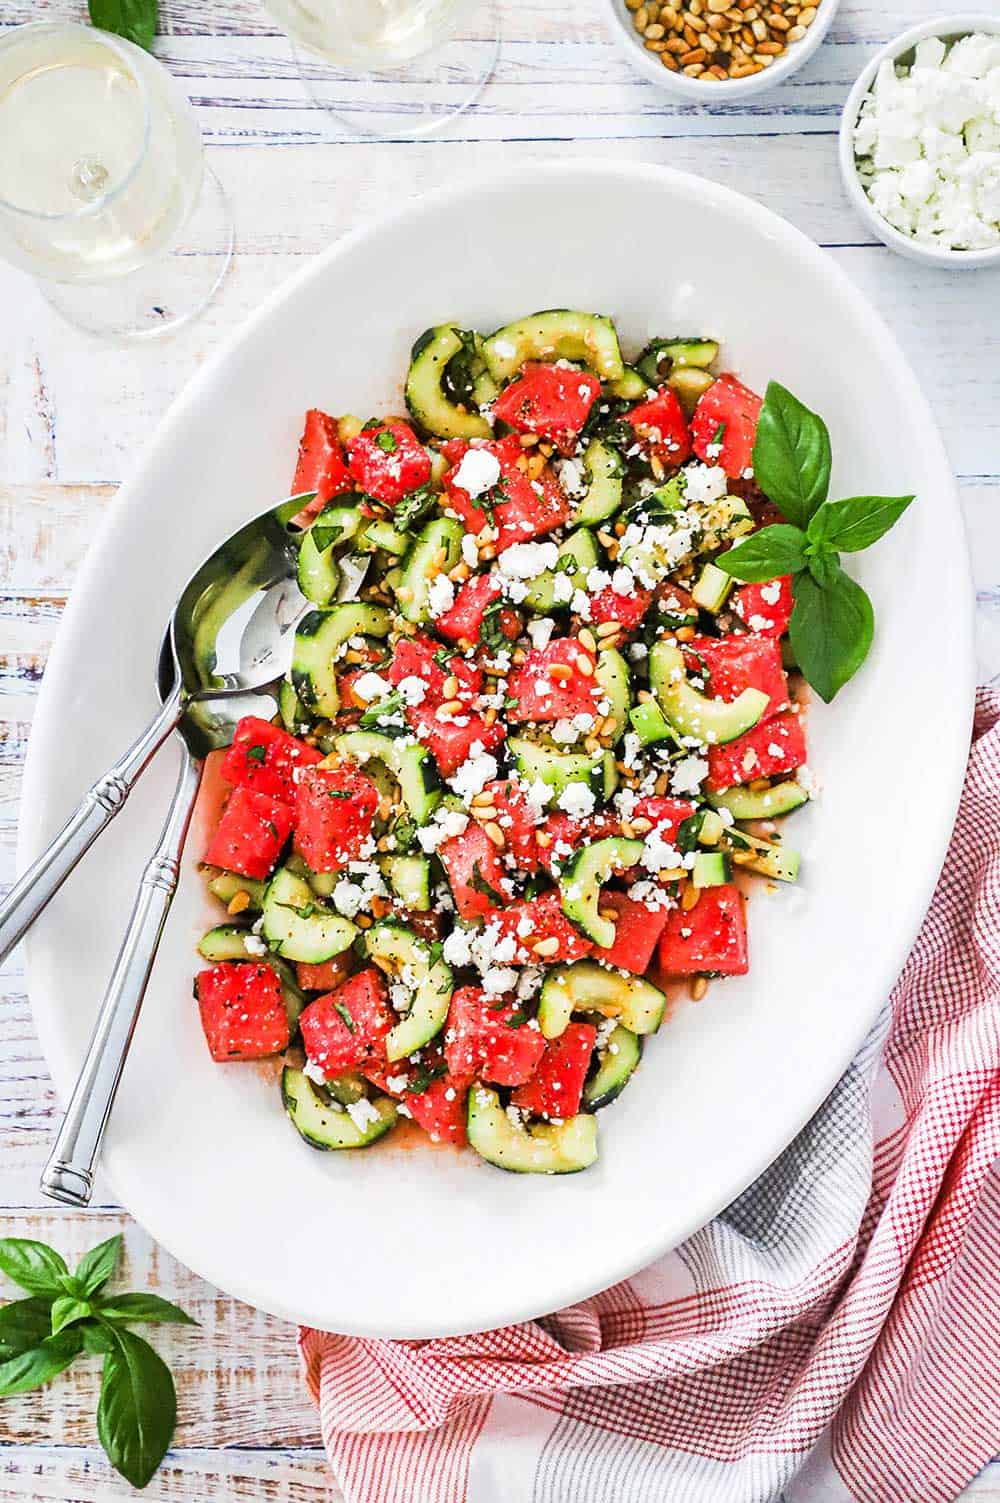 An overhead view of a large white oval platter filled with a watermelon cucumber salad with basil and feta.